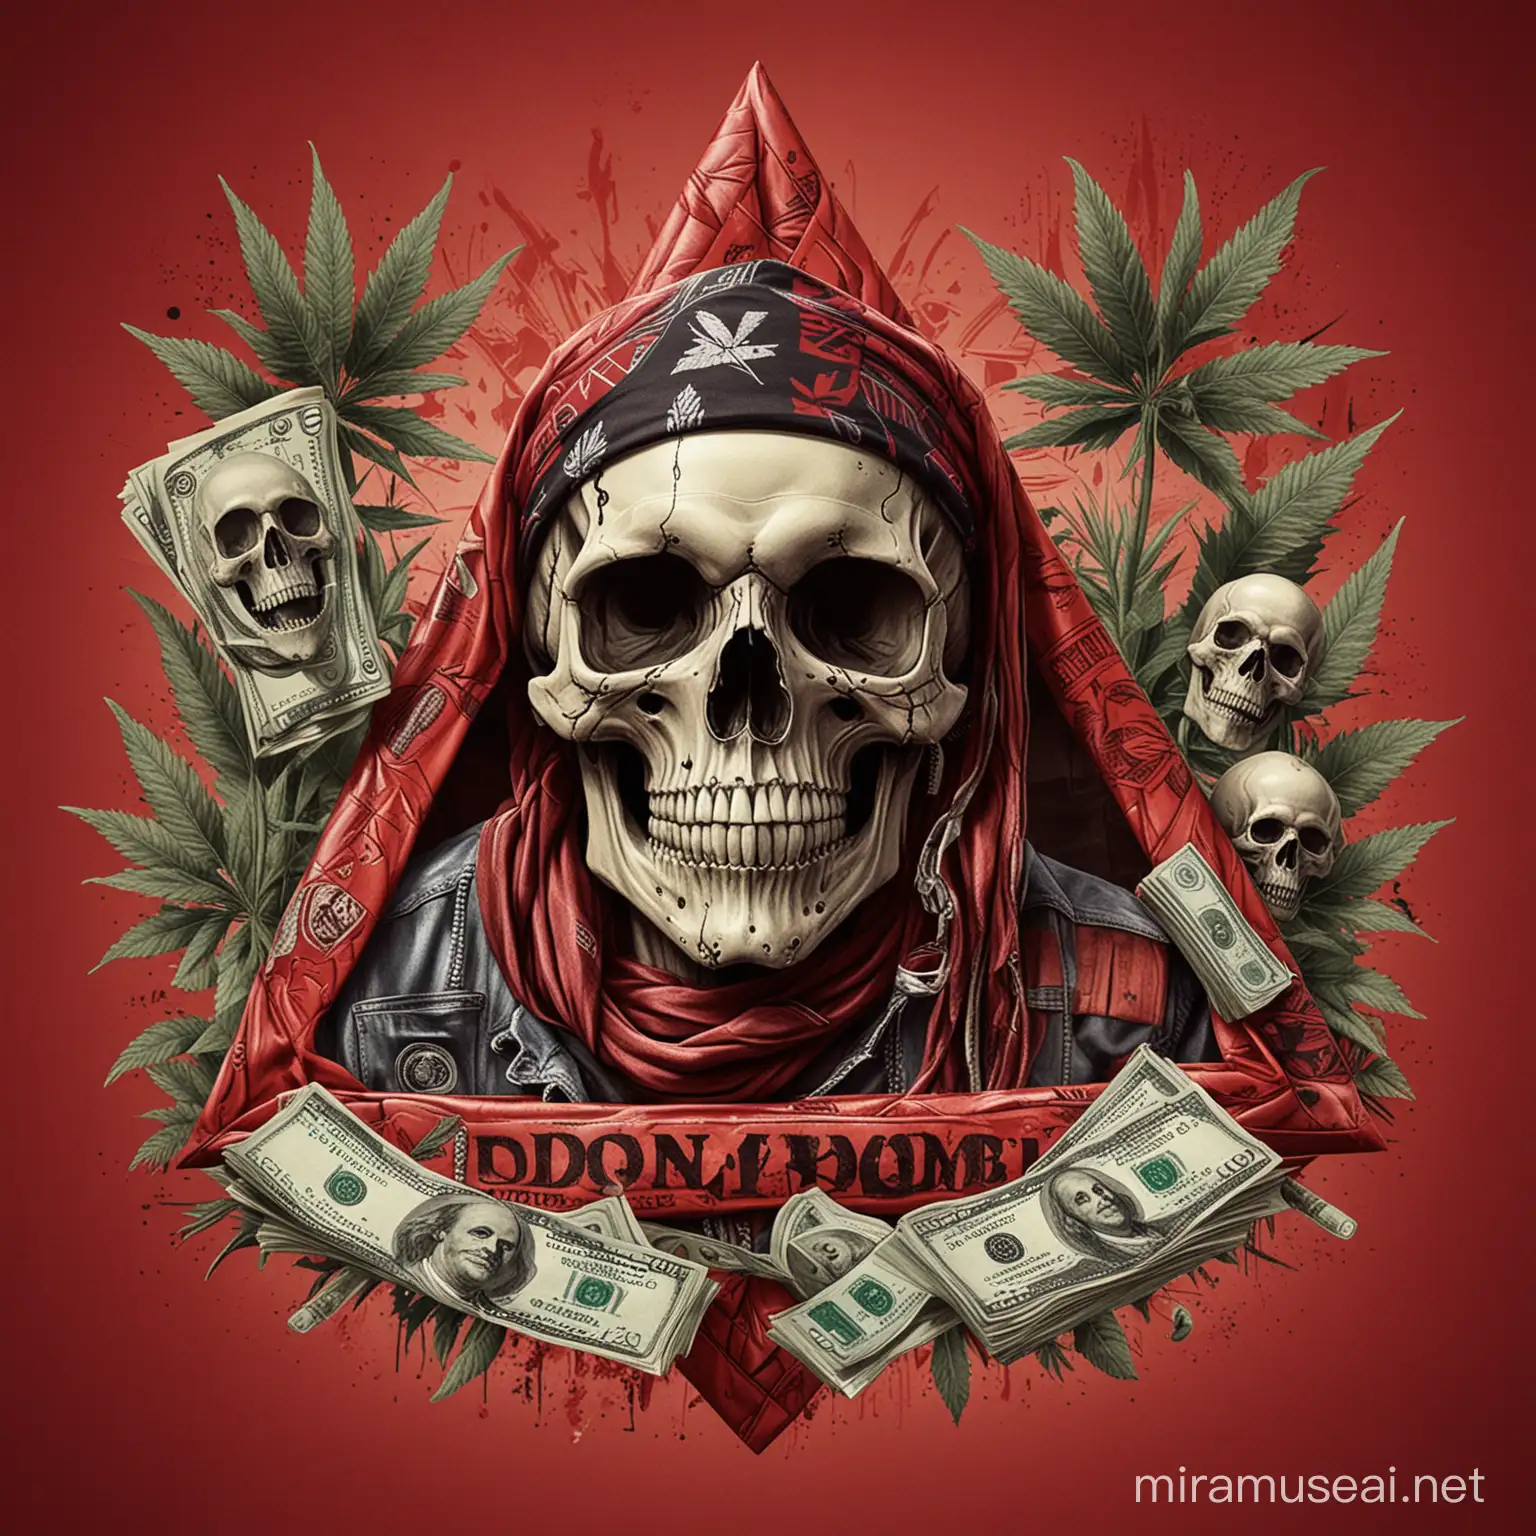 Stylish Skull and Money Bill Design with Dope Mode and 24